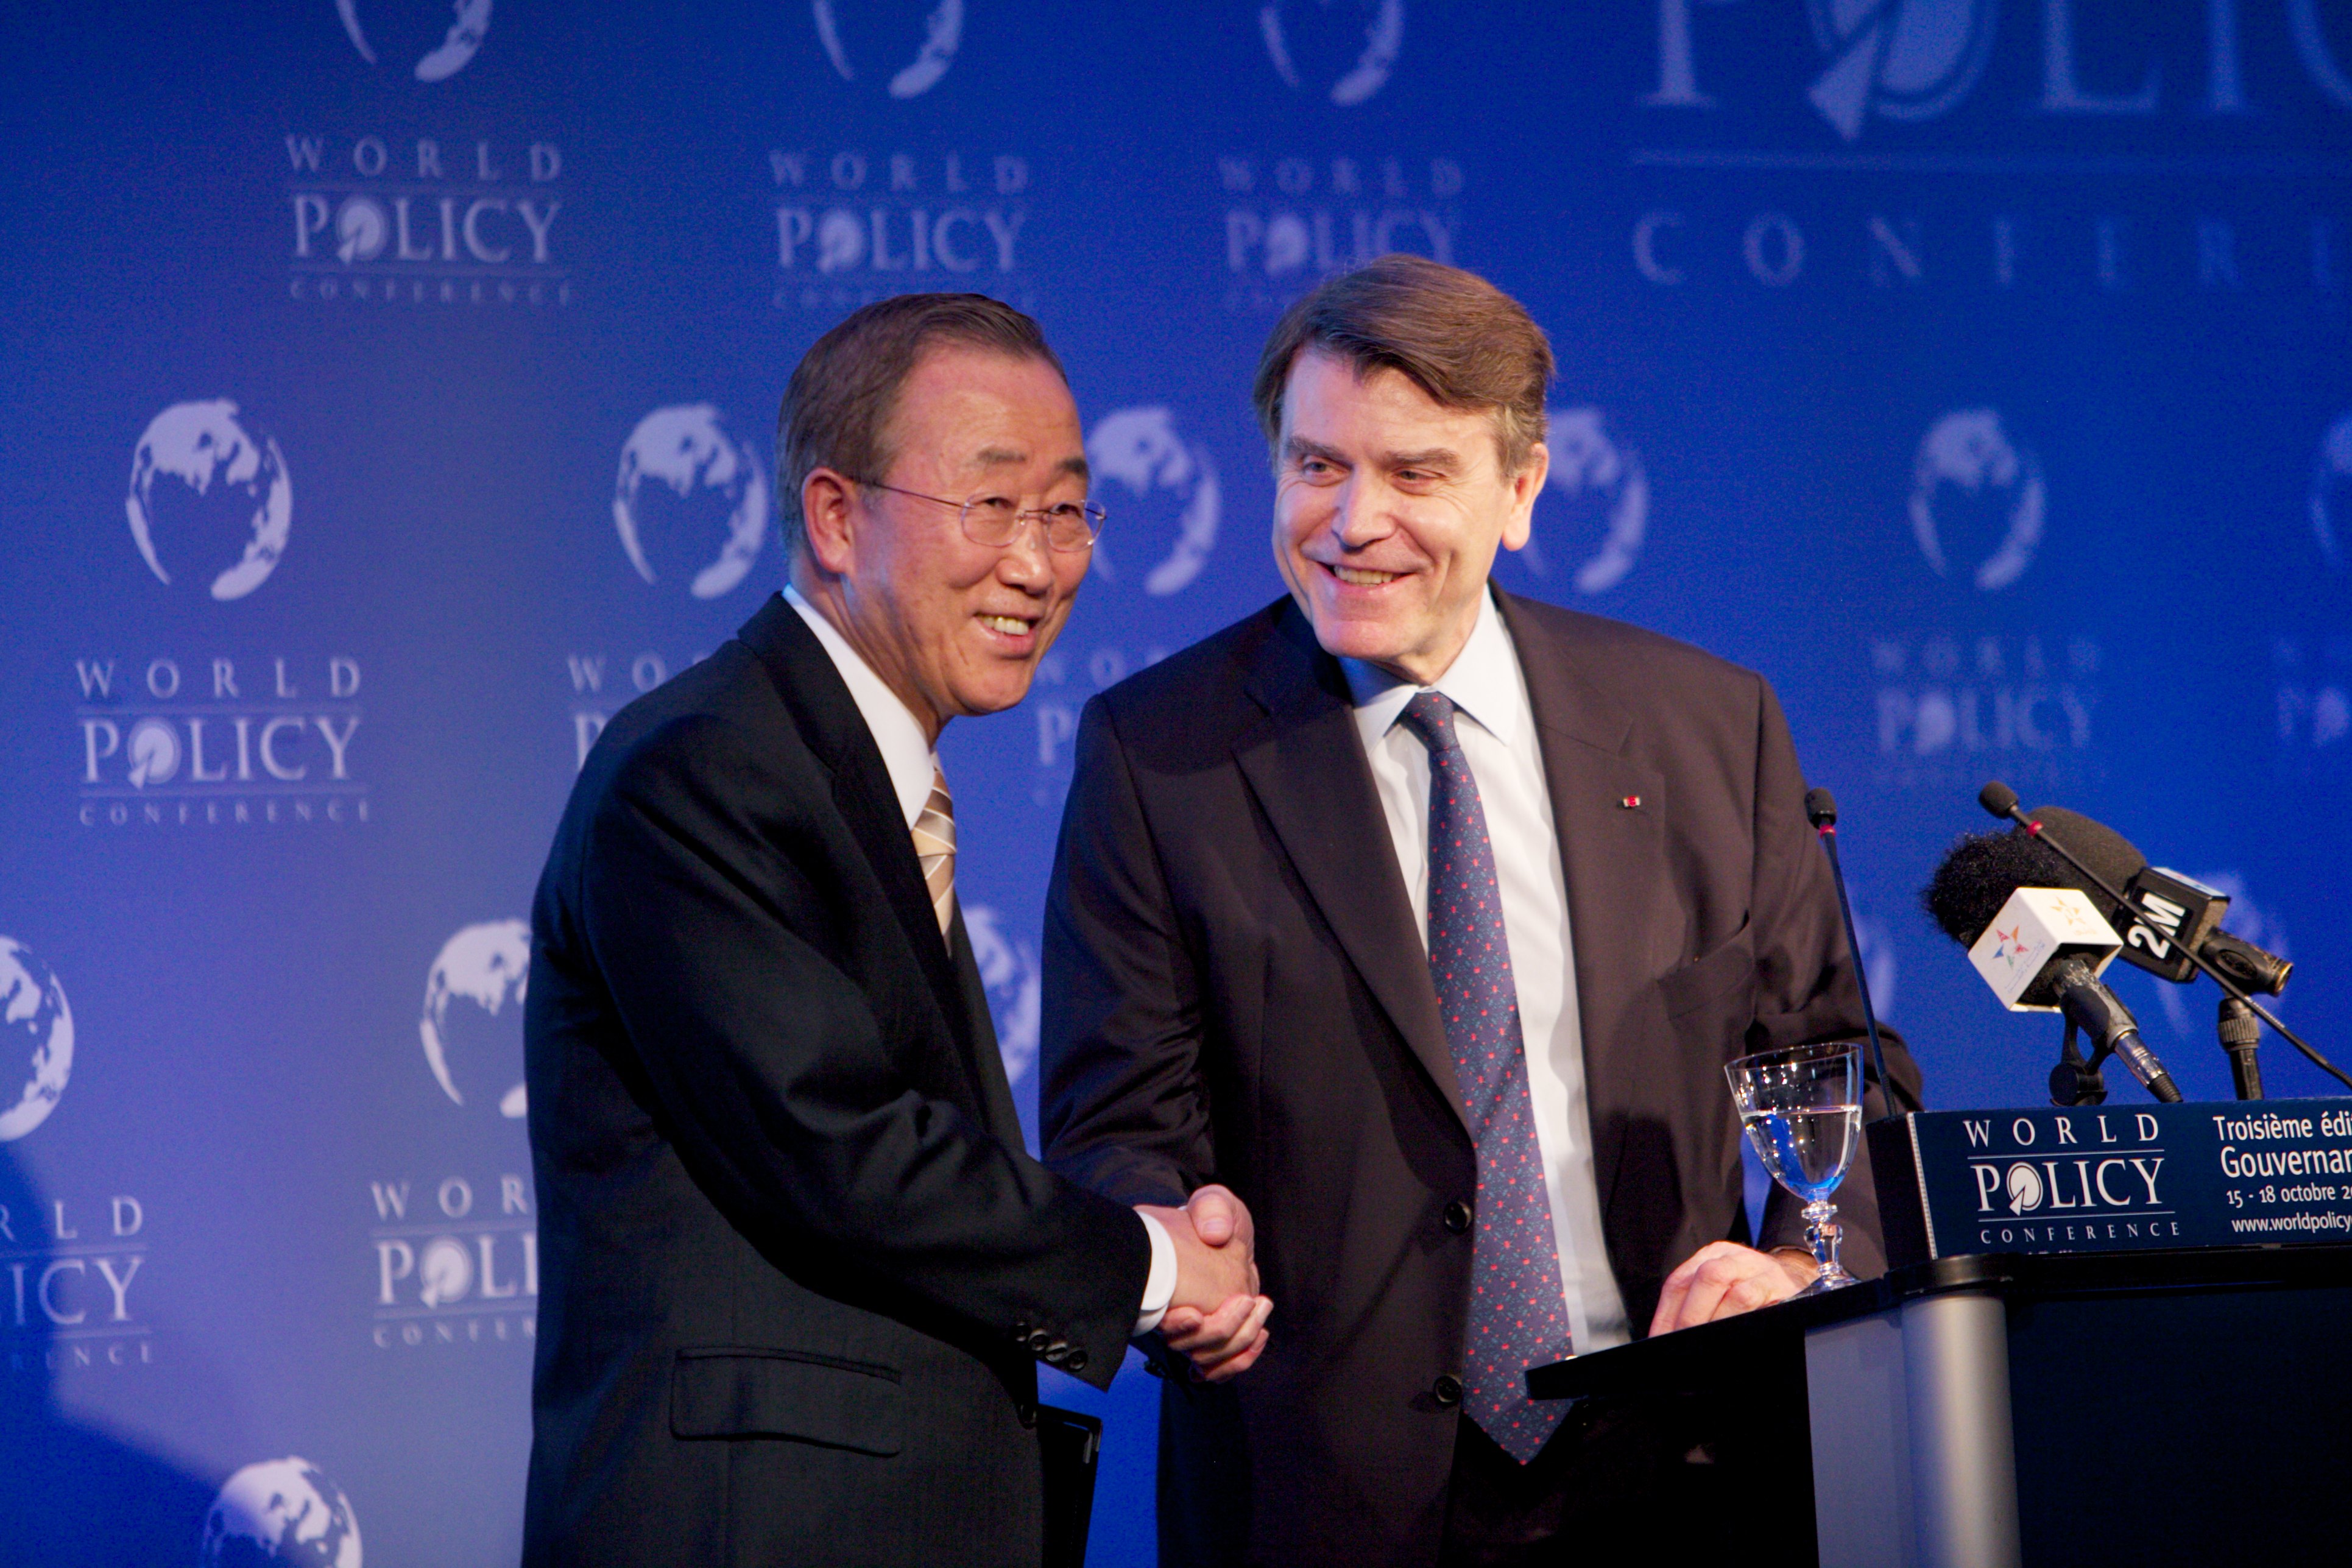 World Policy Conference WPC 2010, Ban Ki-Moon, Thierry de Montbrial